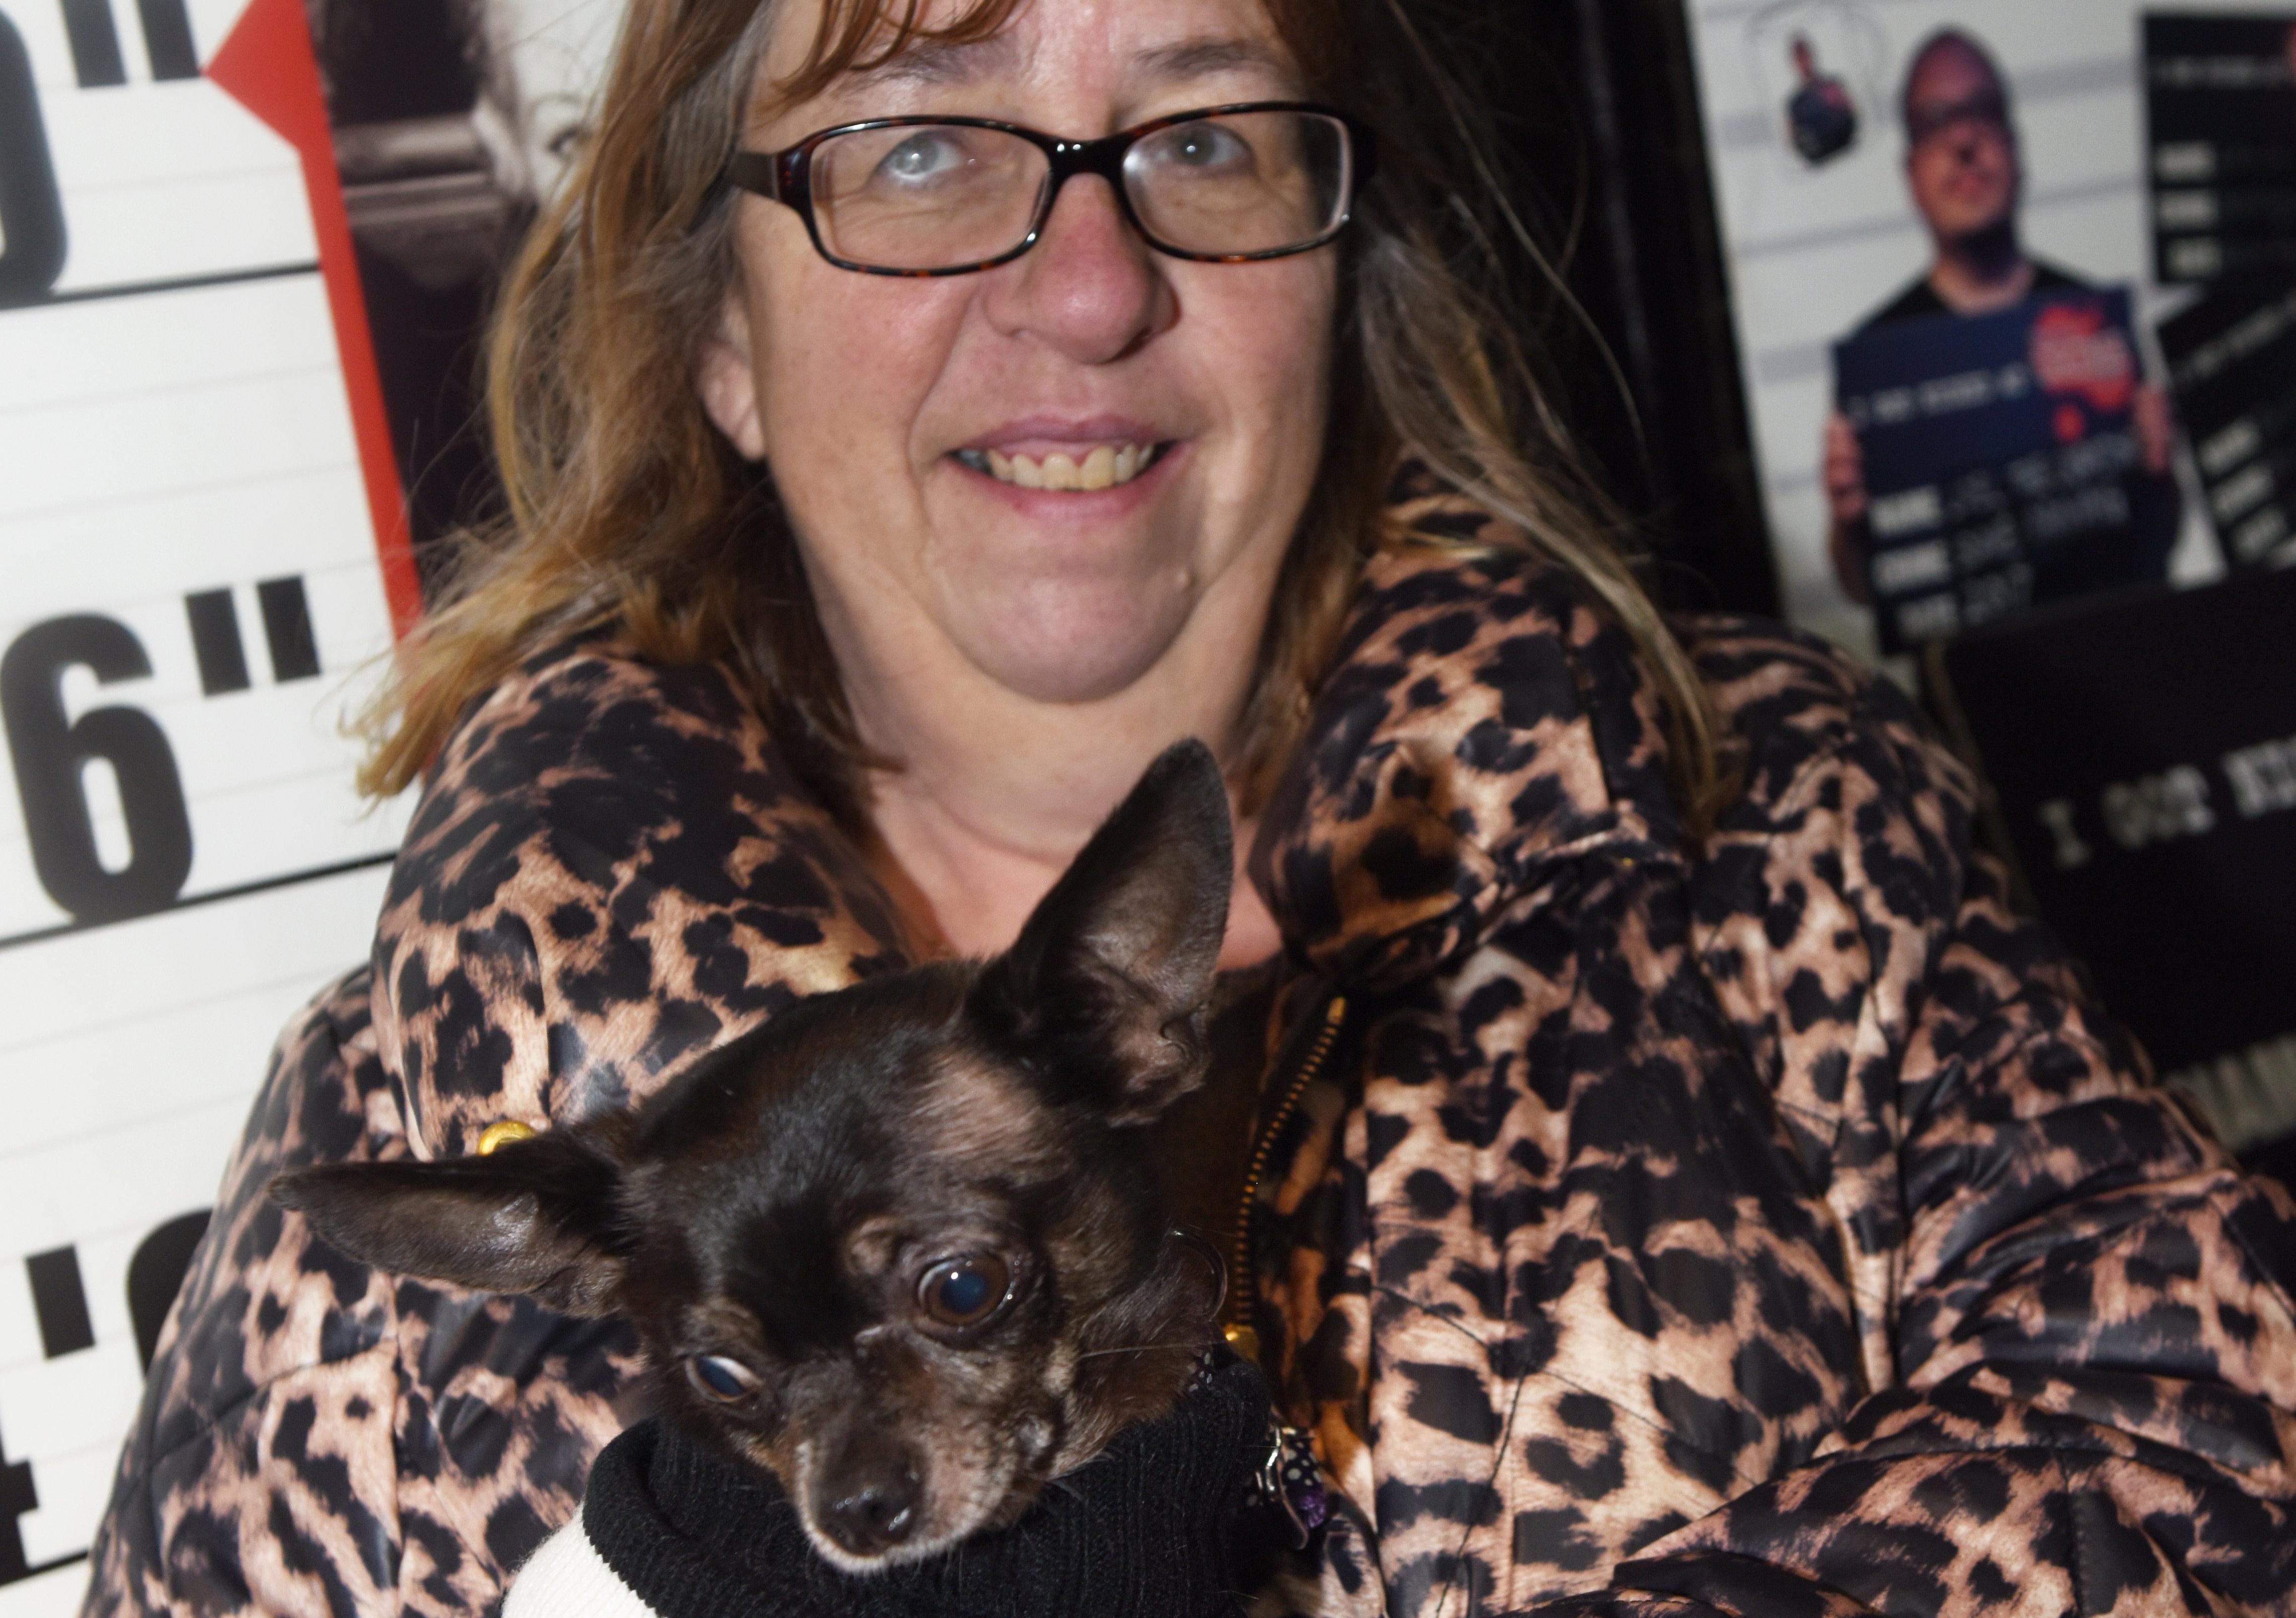 Dress Up Your Dog Day at the True Crime Museum in Hastings

Gill Kew with Tigglebean. SUS-201201-162941001